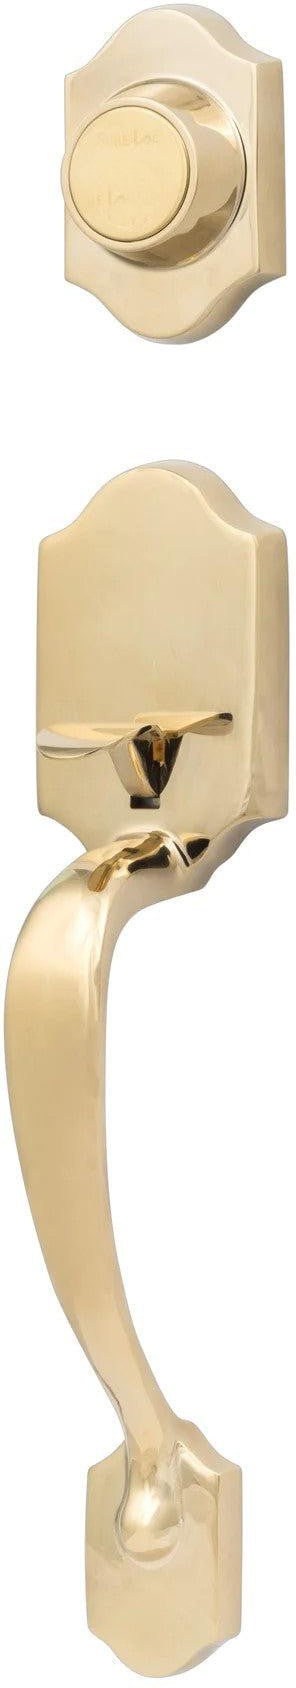 Sure-Loc Coral Dummy Handleset in Polished Brass finish